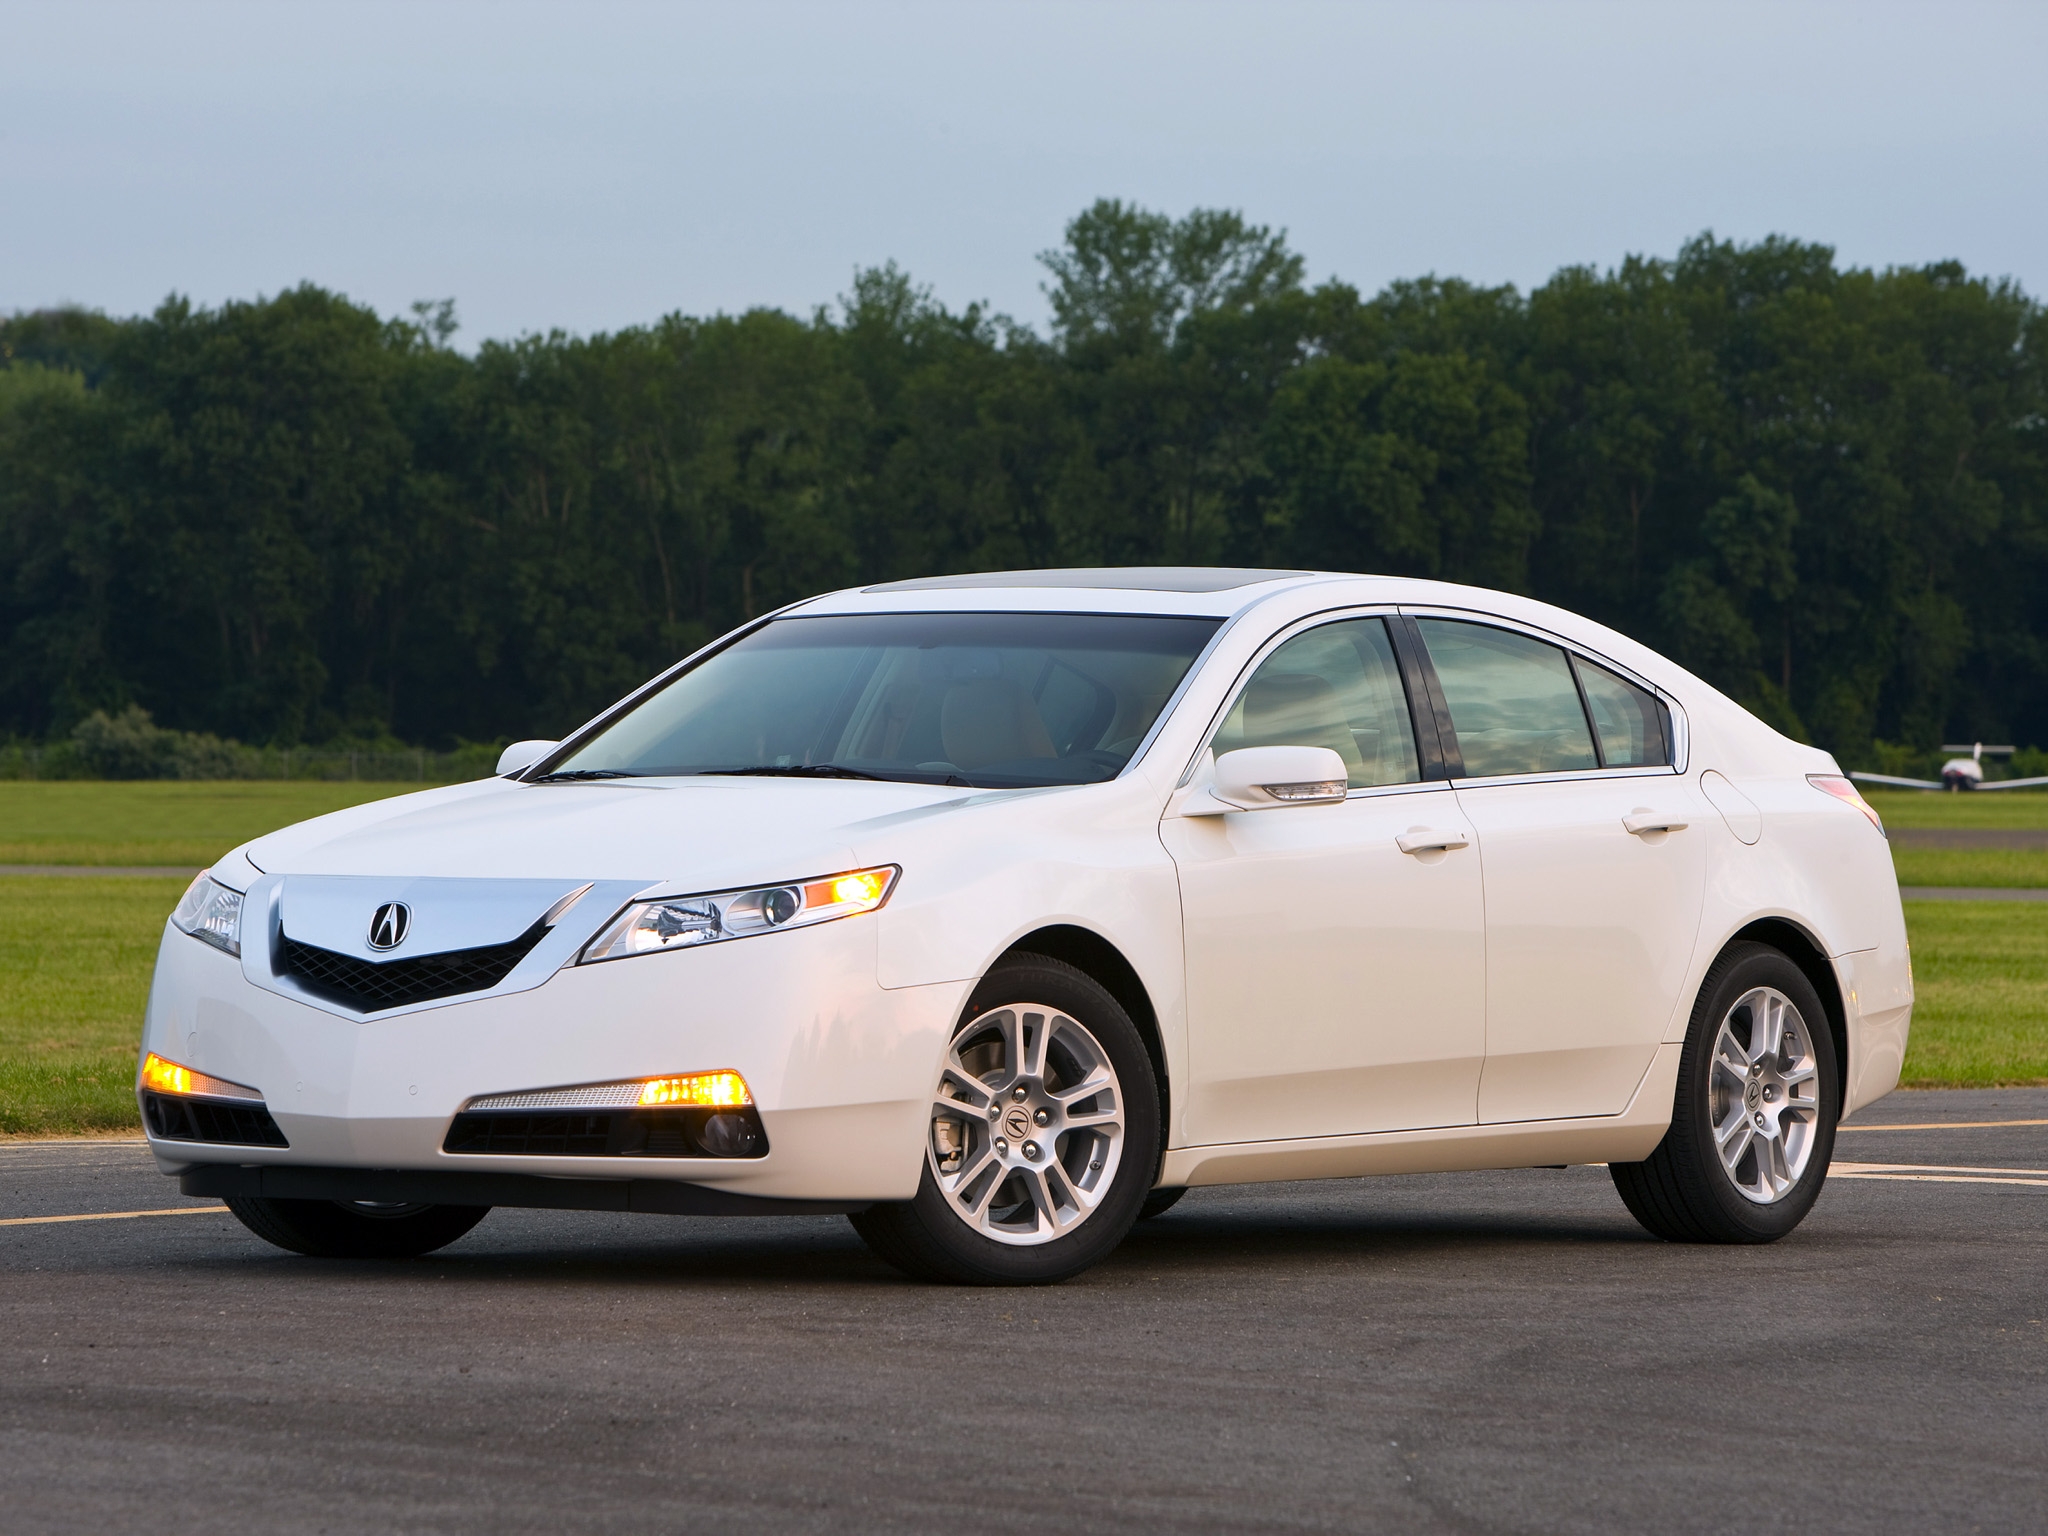 cars, auto, nature, trees, grass, acura, white, side view, style, akura, 2008, tl 5K